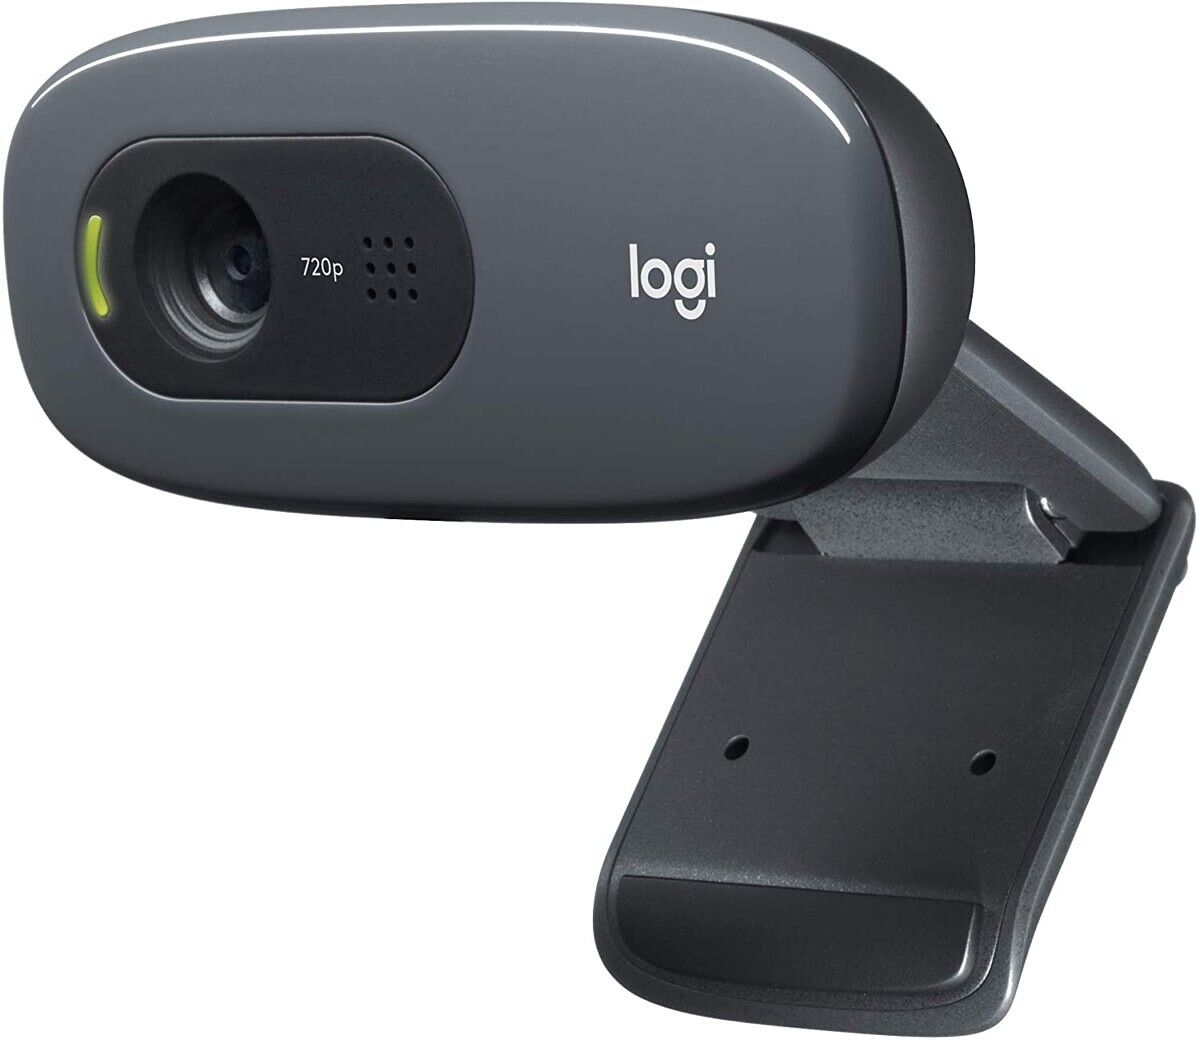 This is one of the best webcams for Chromebook if it's going to be your first webcam. It can only output at 720p though which should be sufficient for the occasional video call with friends and family.